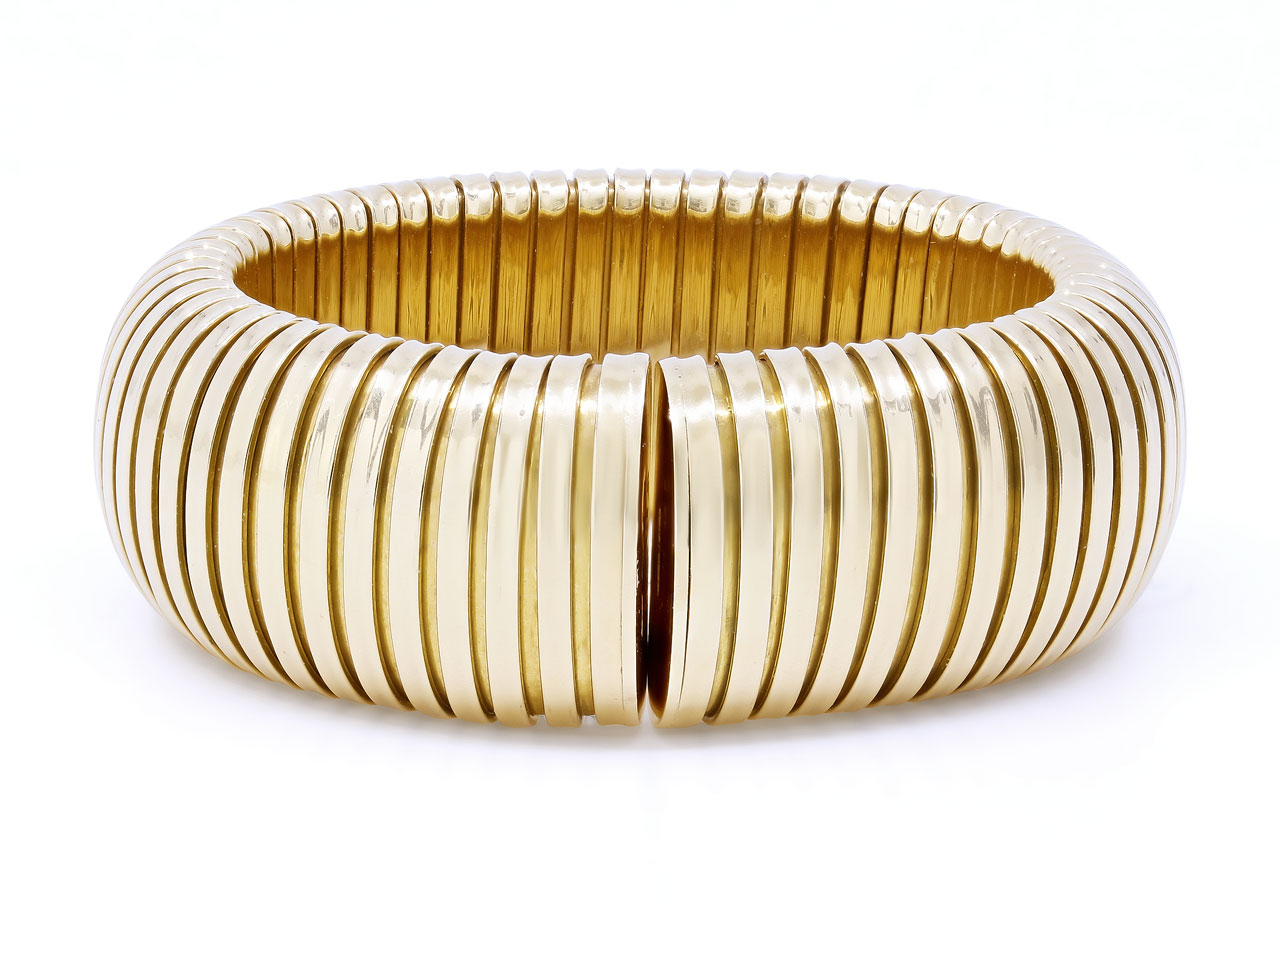 Domed Tubogas Cuff in 18K Yellow Gold, Size Small